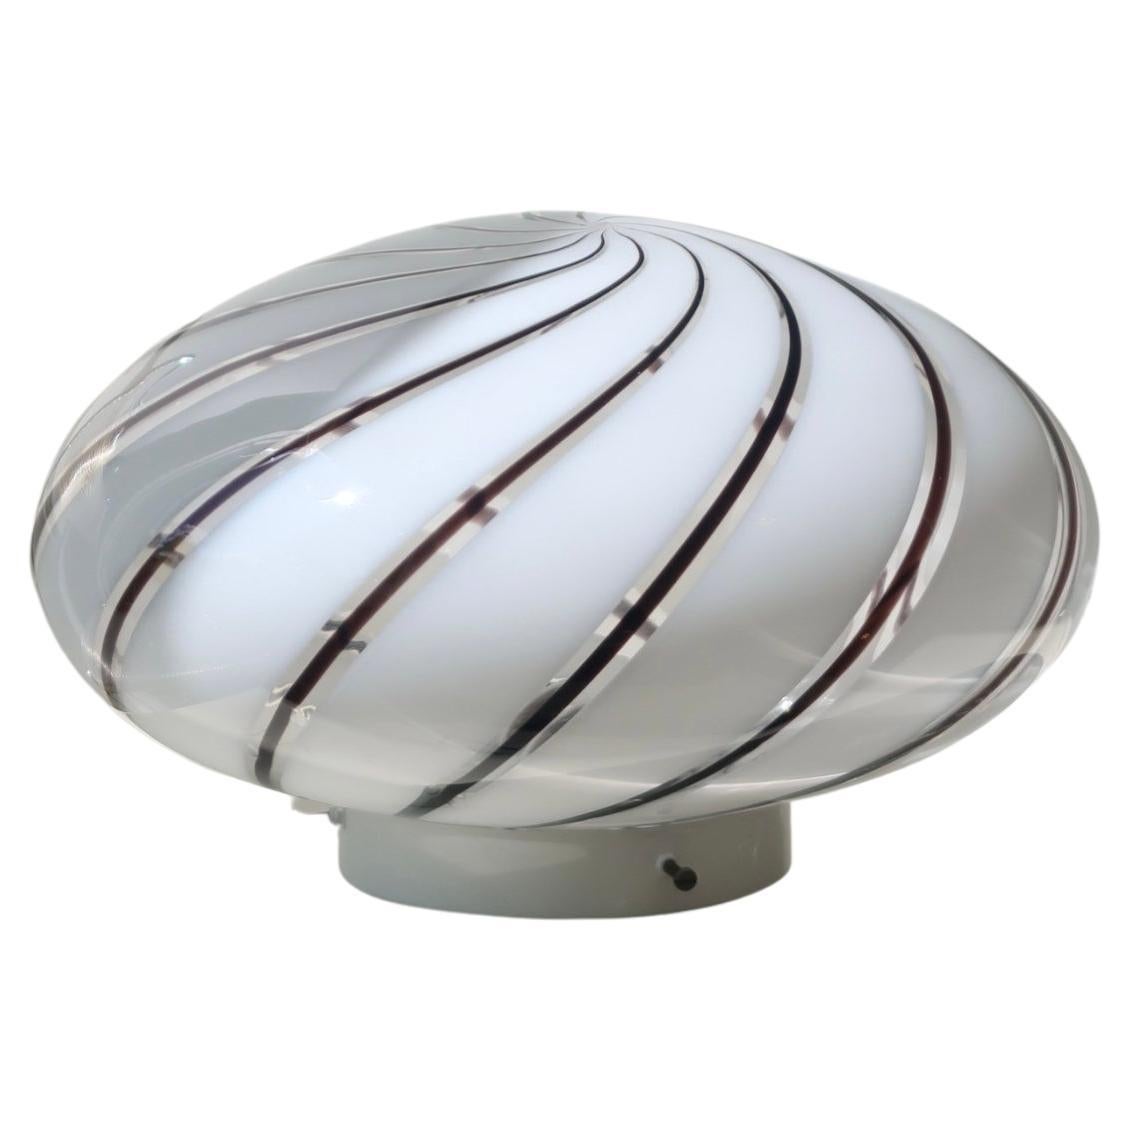 Vintage Murano plafond ceiling lamp / wall lamp. Mouth-blown white opal glass with dark swirl and white base. Handmade in Italy, 1970s. Measures: D:32 cm?? H:20 cm.



